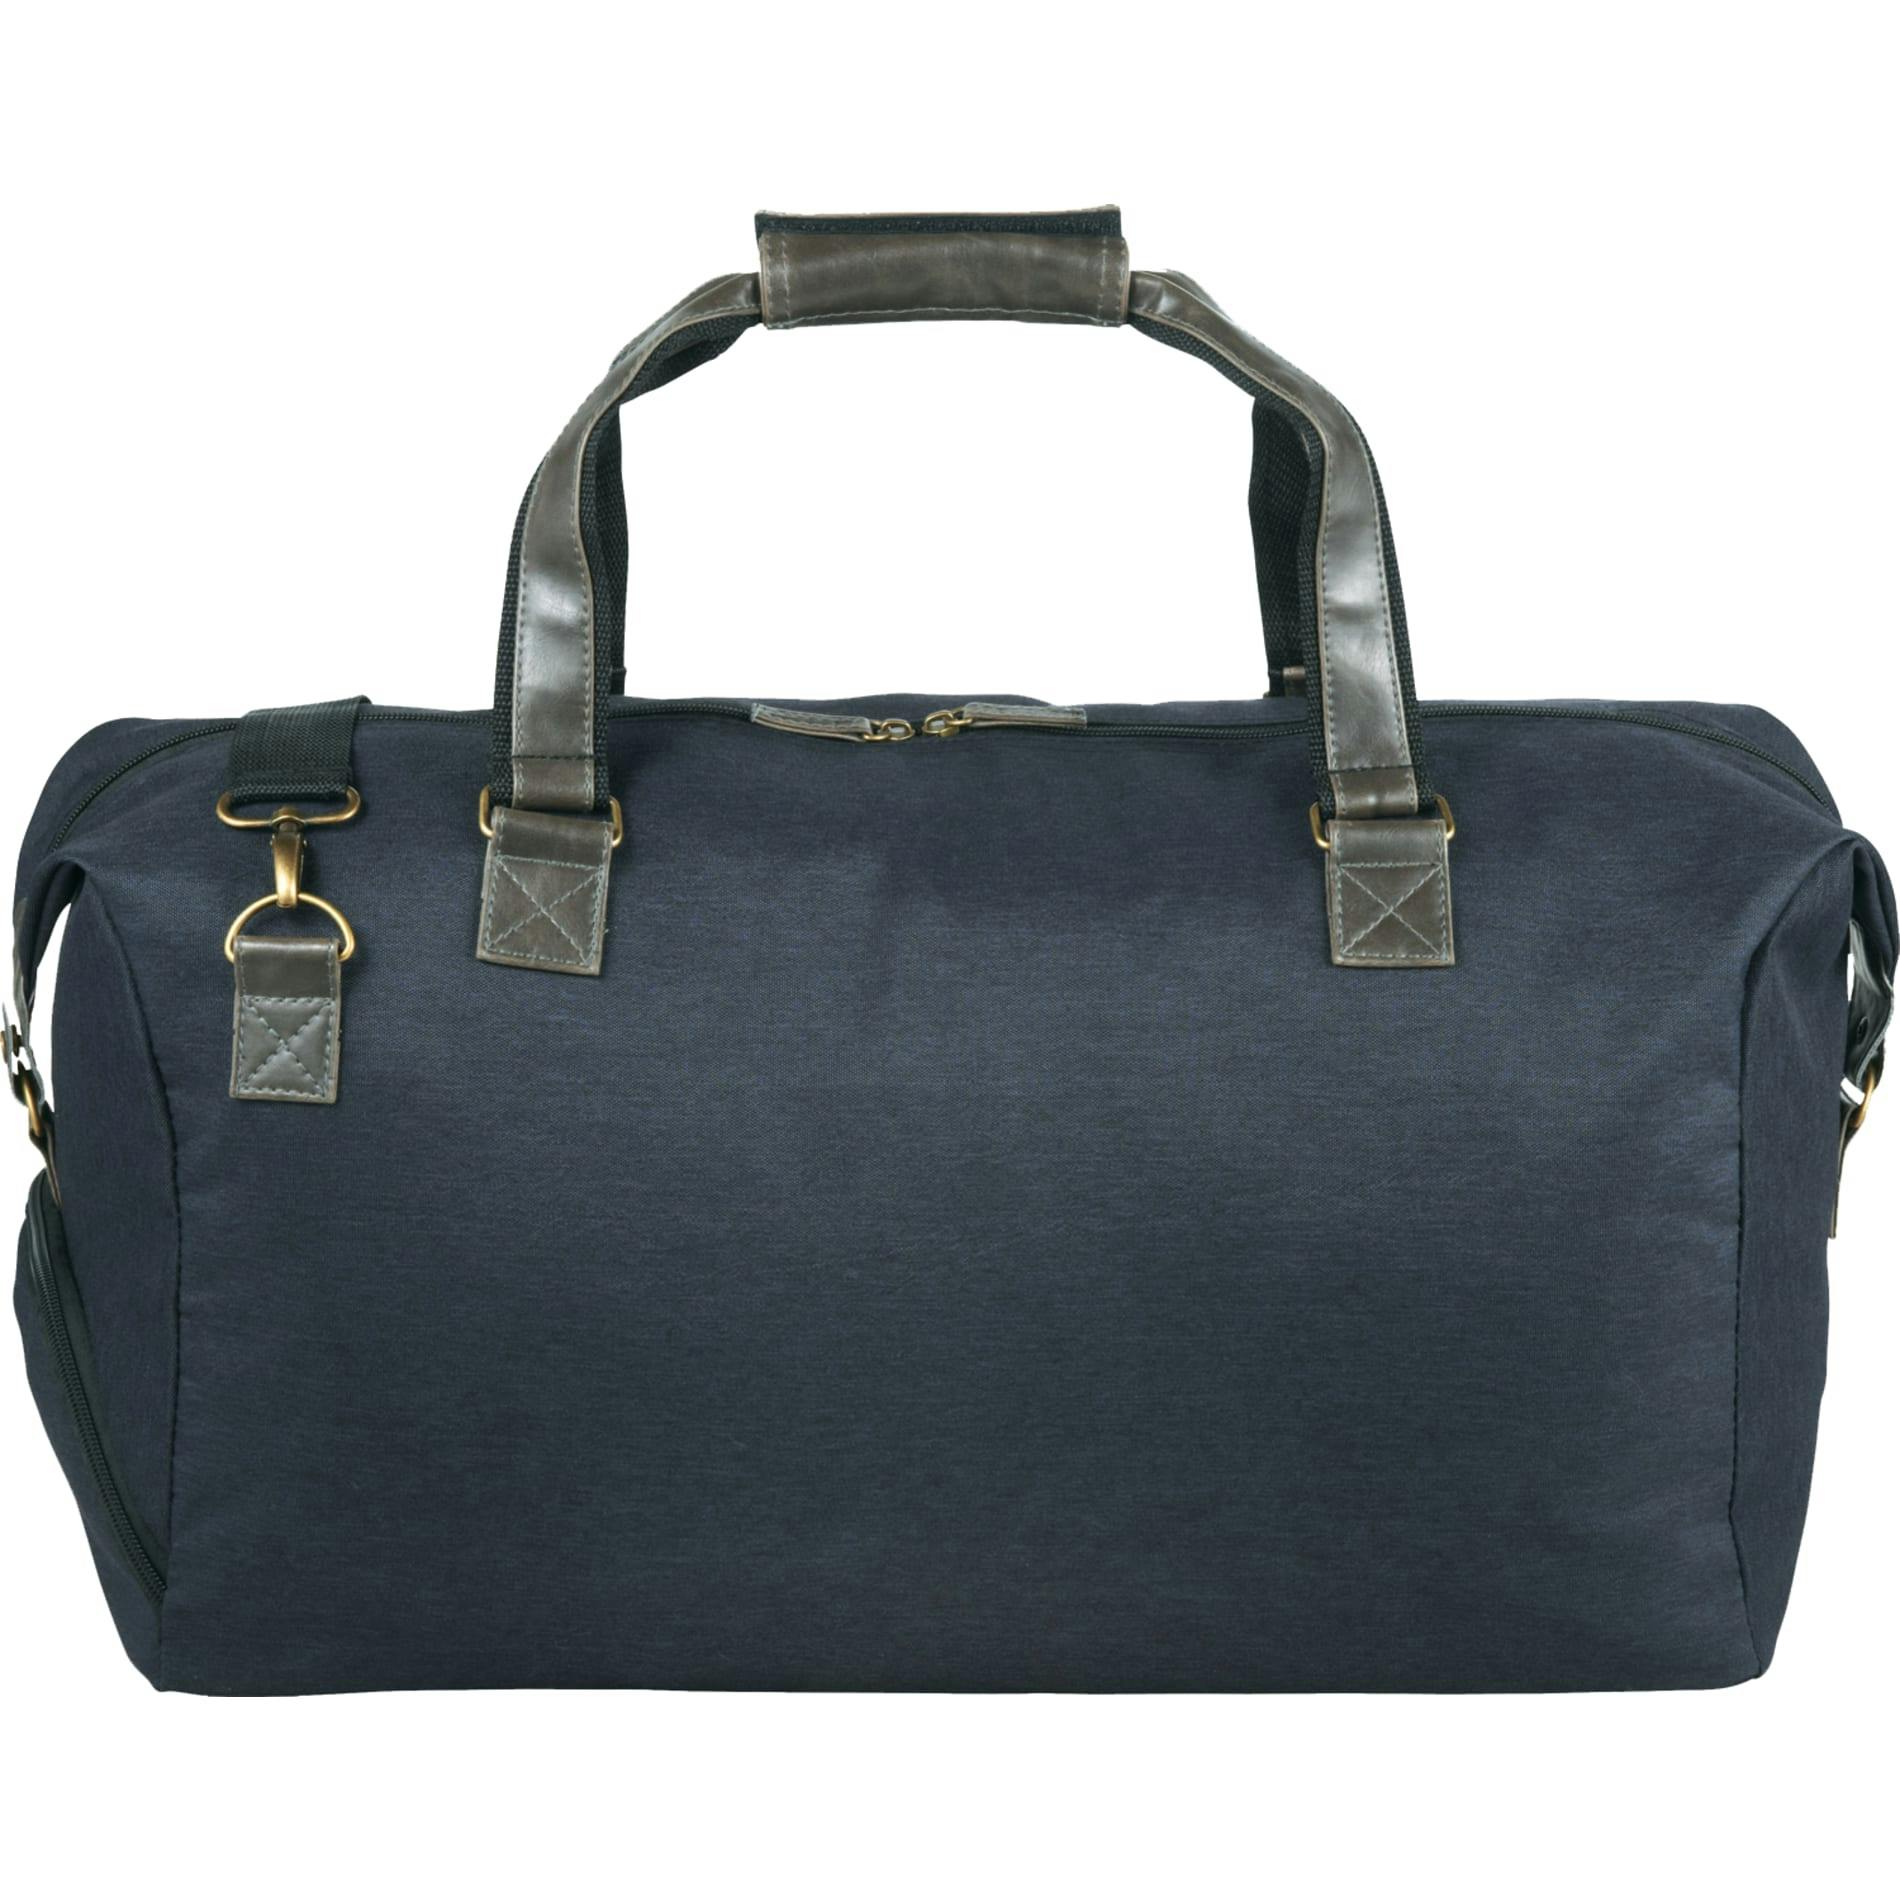 The Capitol 20" Duffel Bag - additional Image 1